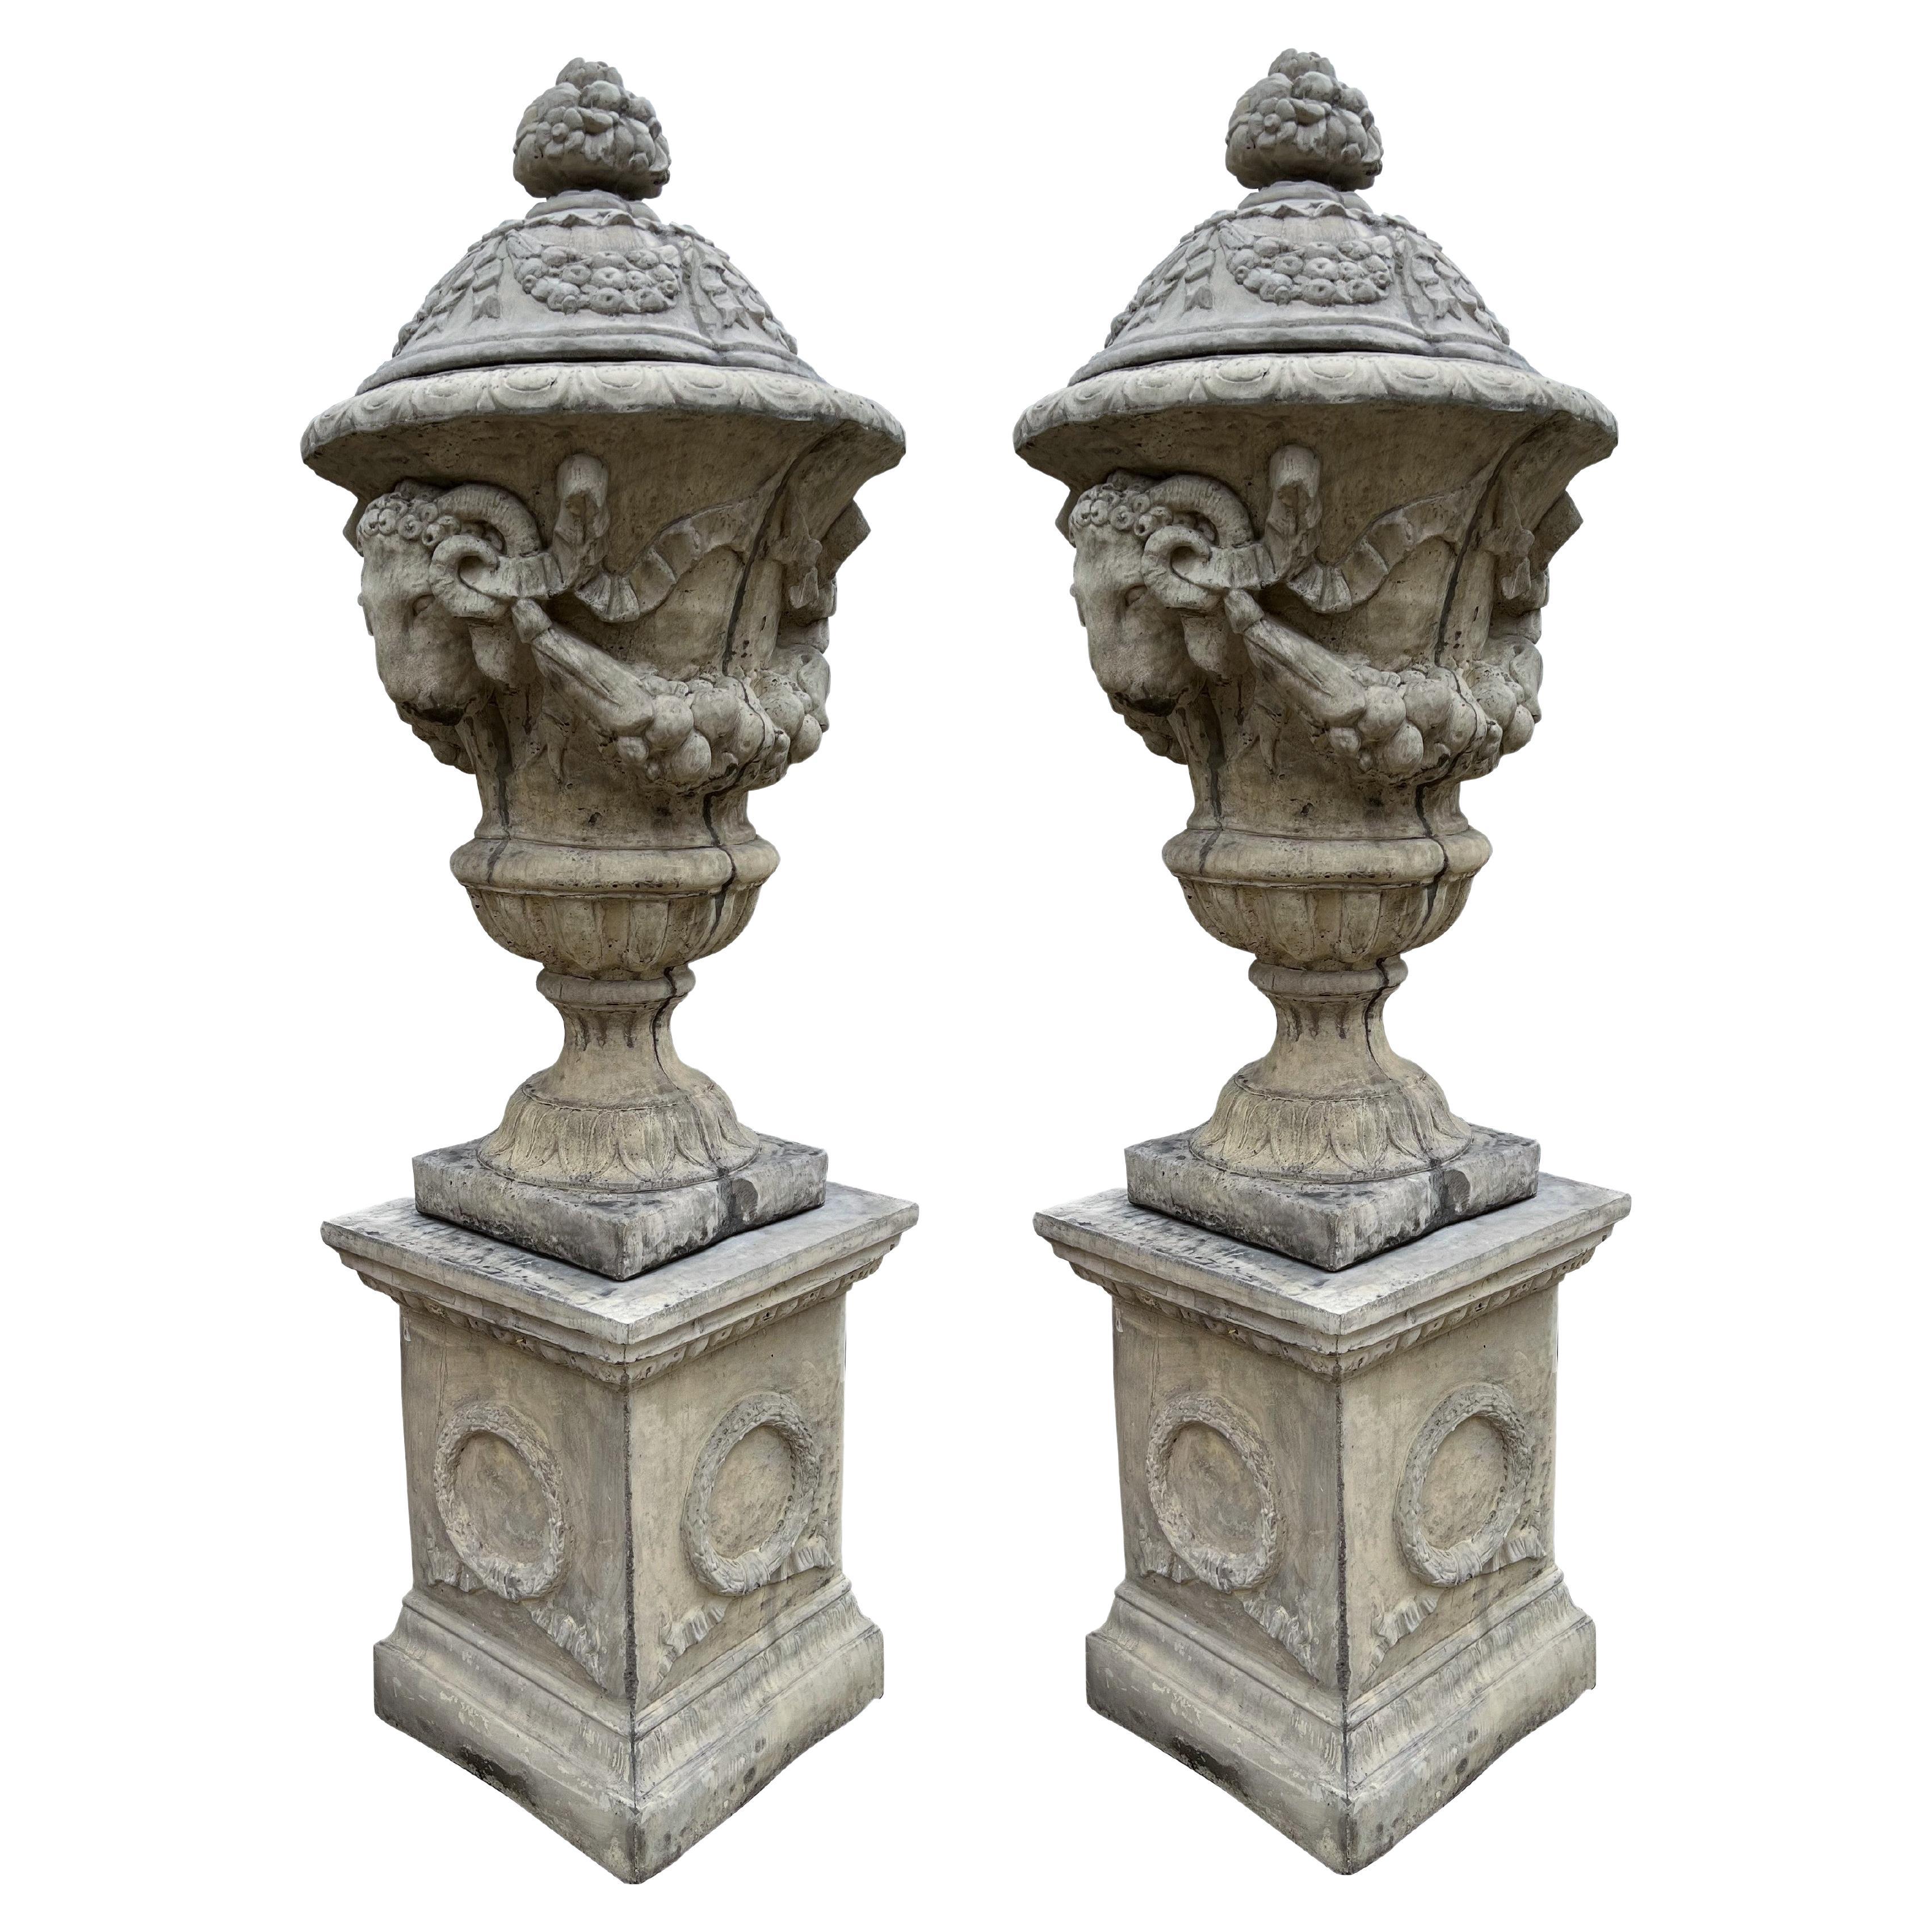 Pair of Tall Cast Garden Urns on Pedestals with Rams Heads and Swags